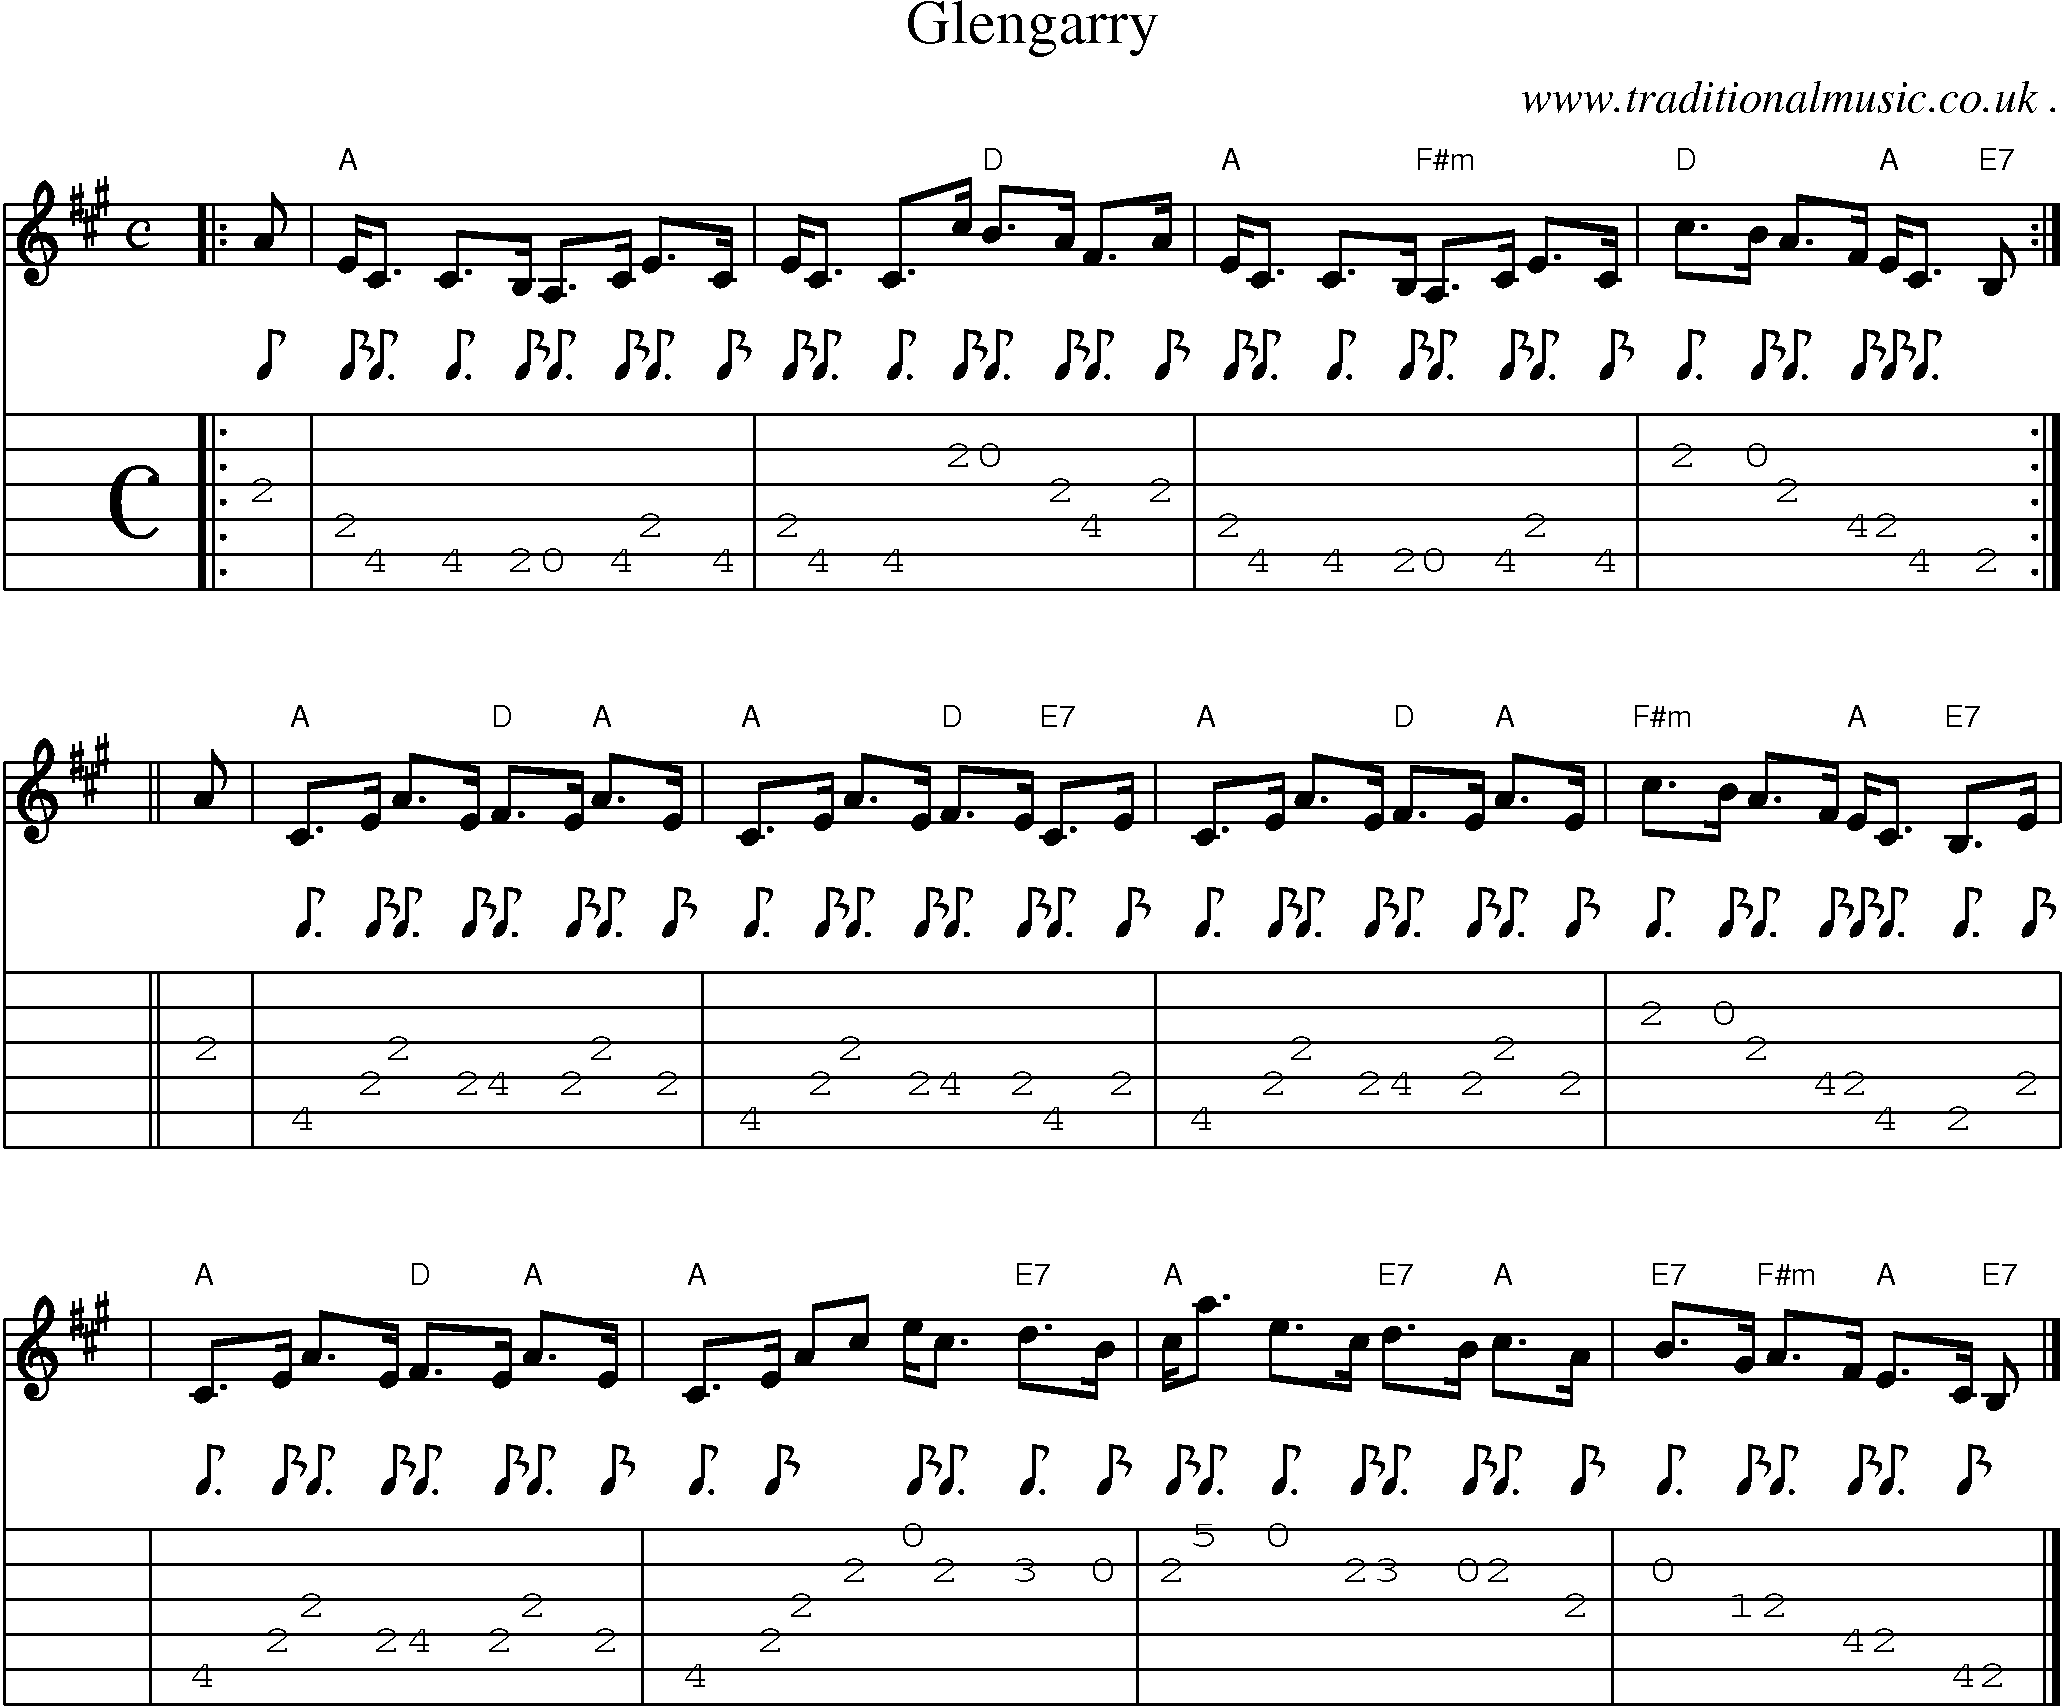 Sheet-music  score, Chords and Guitar Tabs for Glengarry